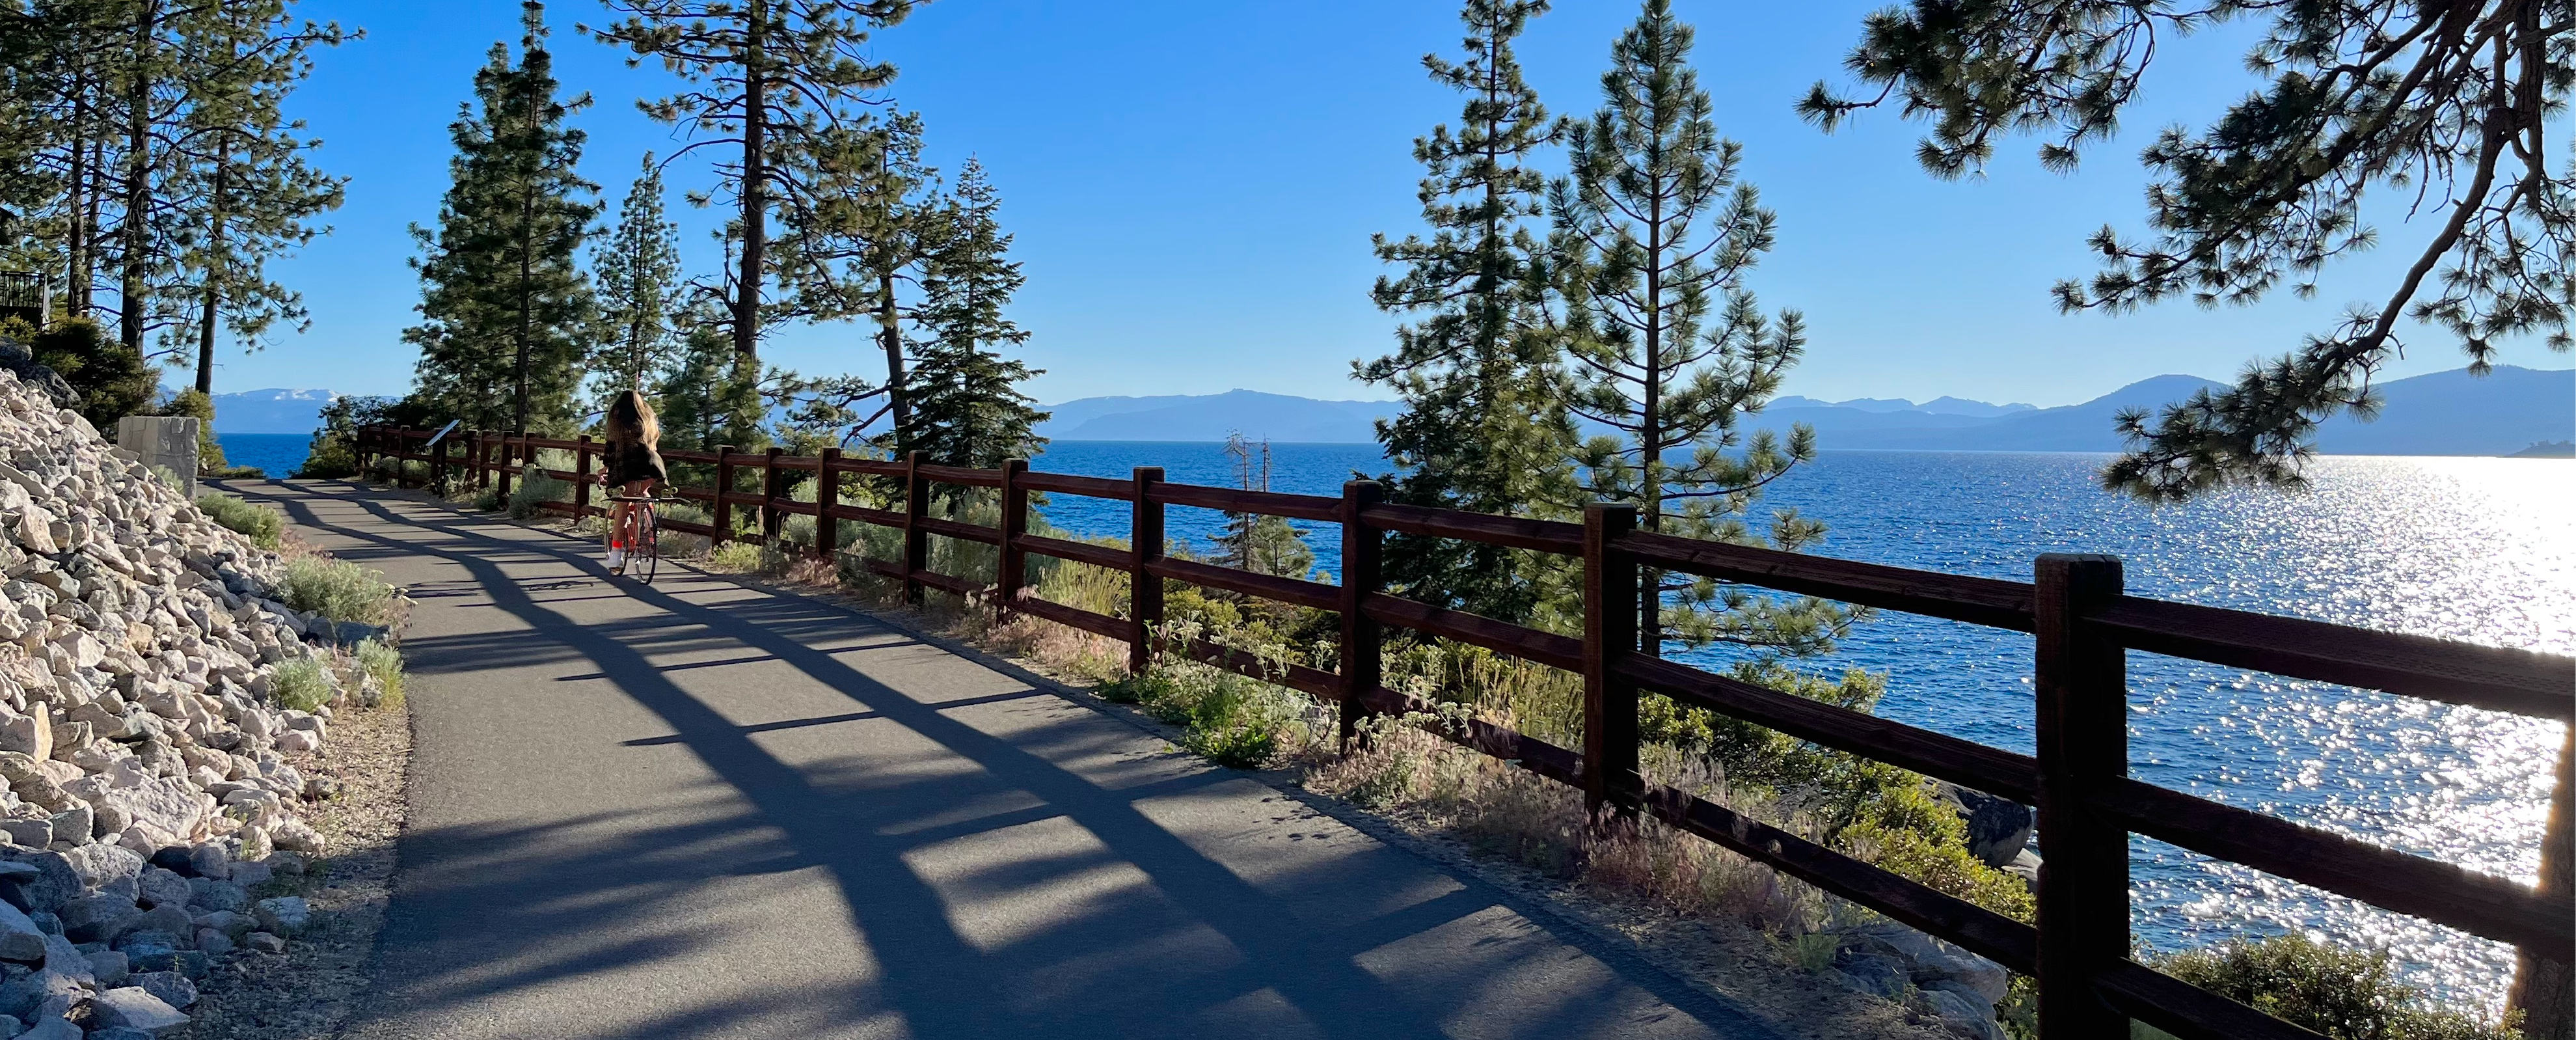 Tahoe Fund East Shore Trail